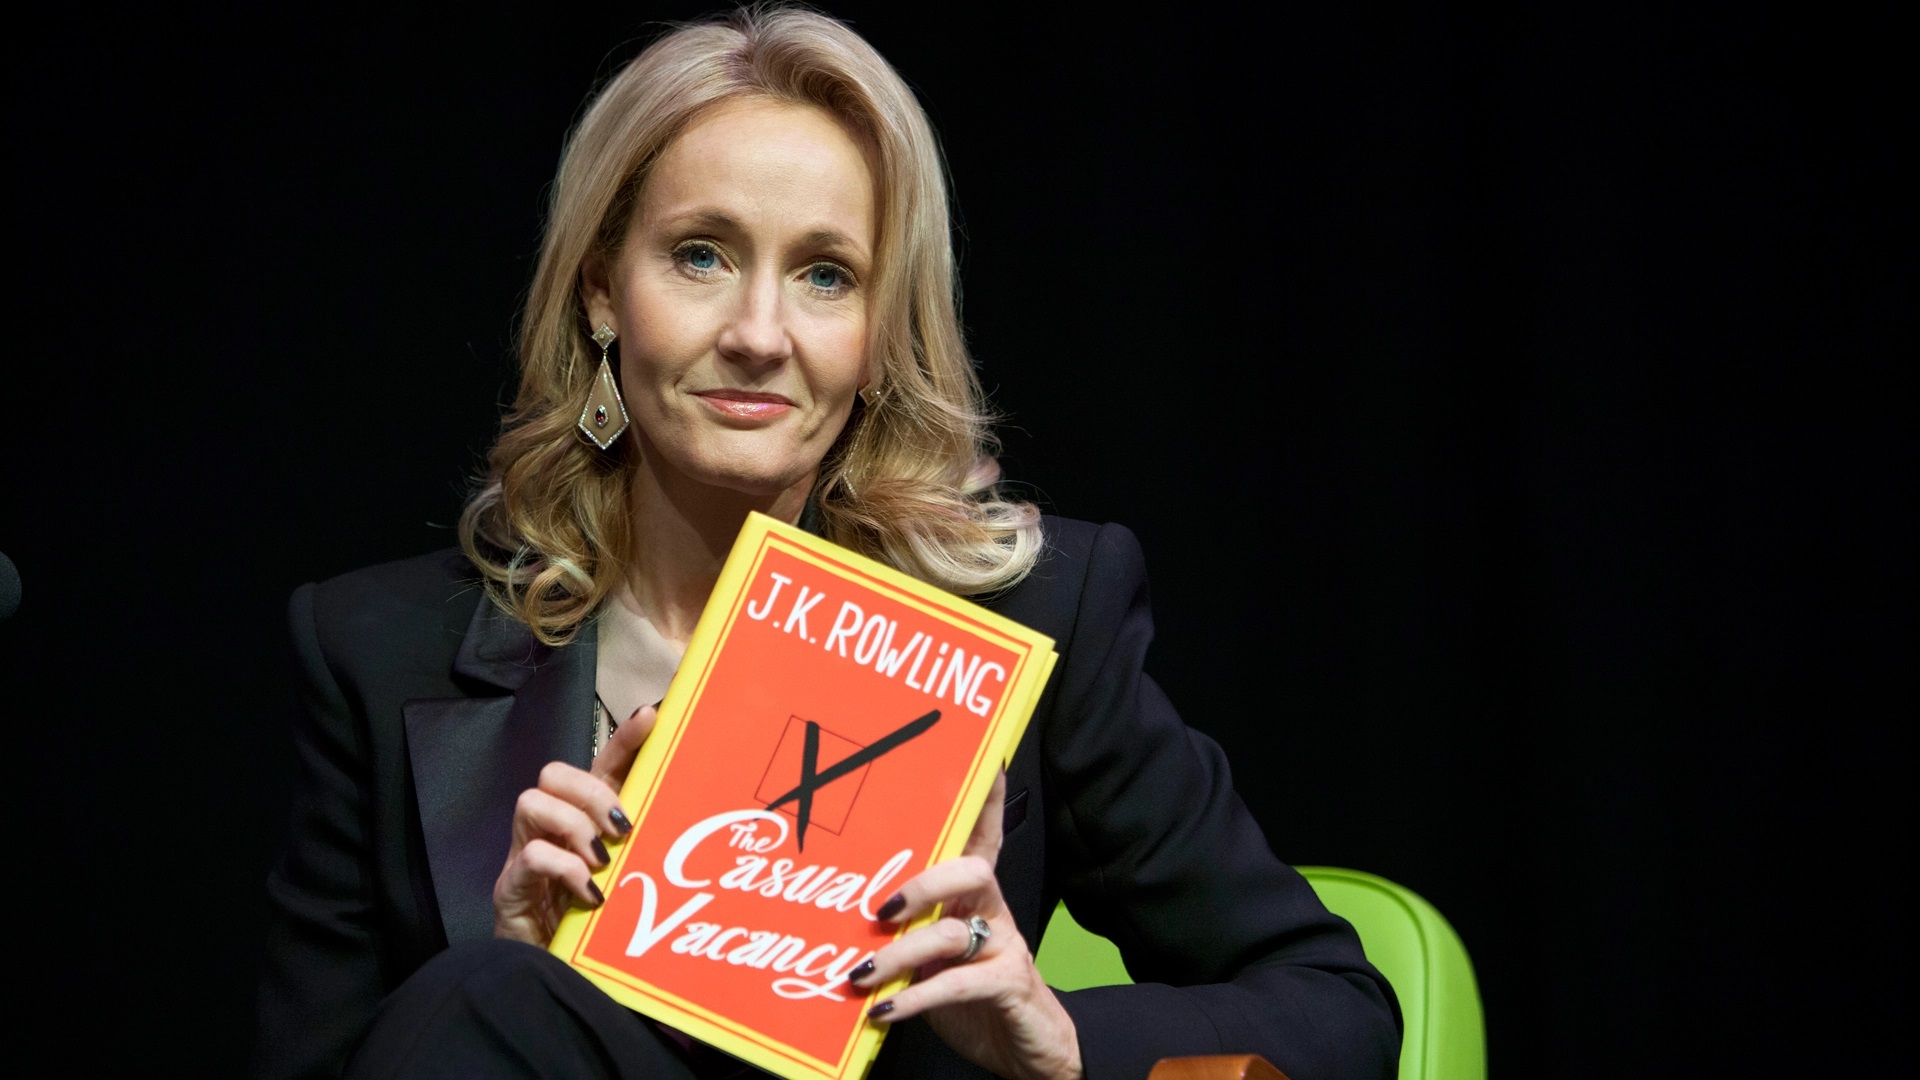 J.K. Rowling posing with her book casual vacancy.